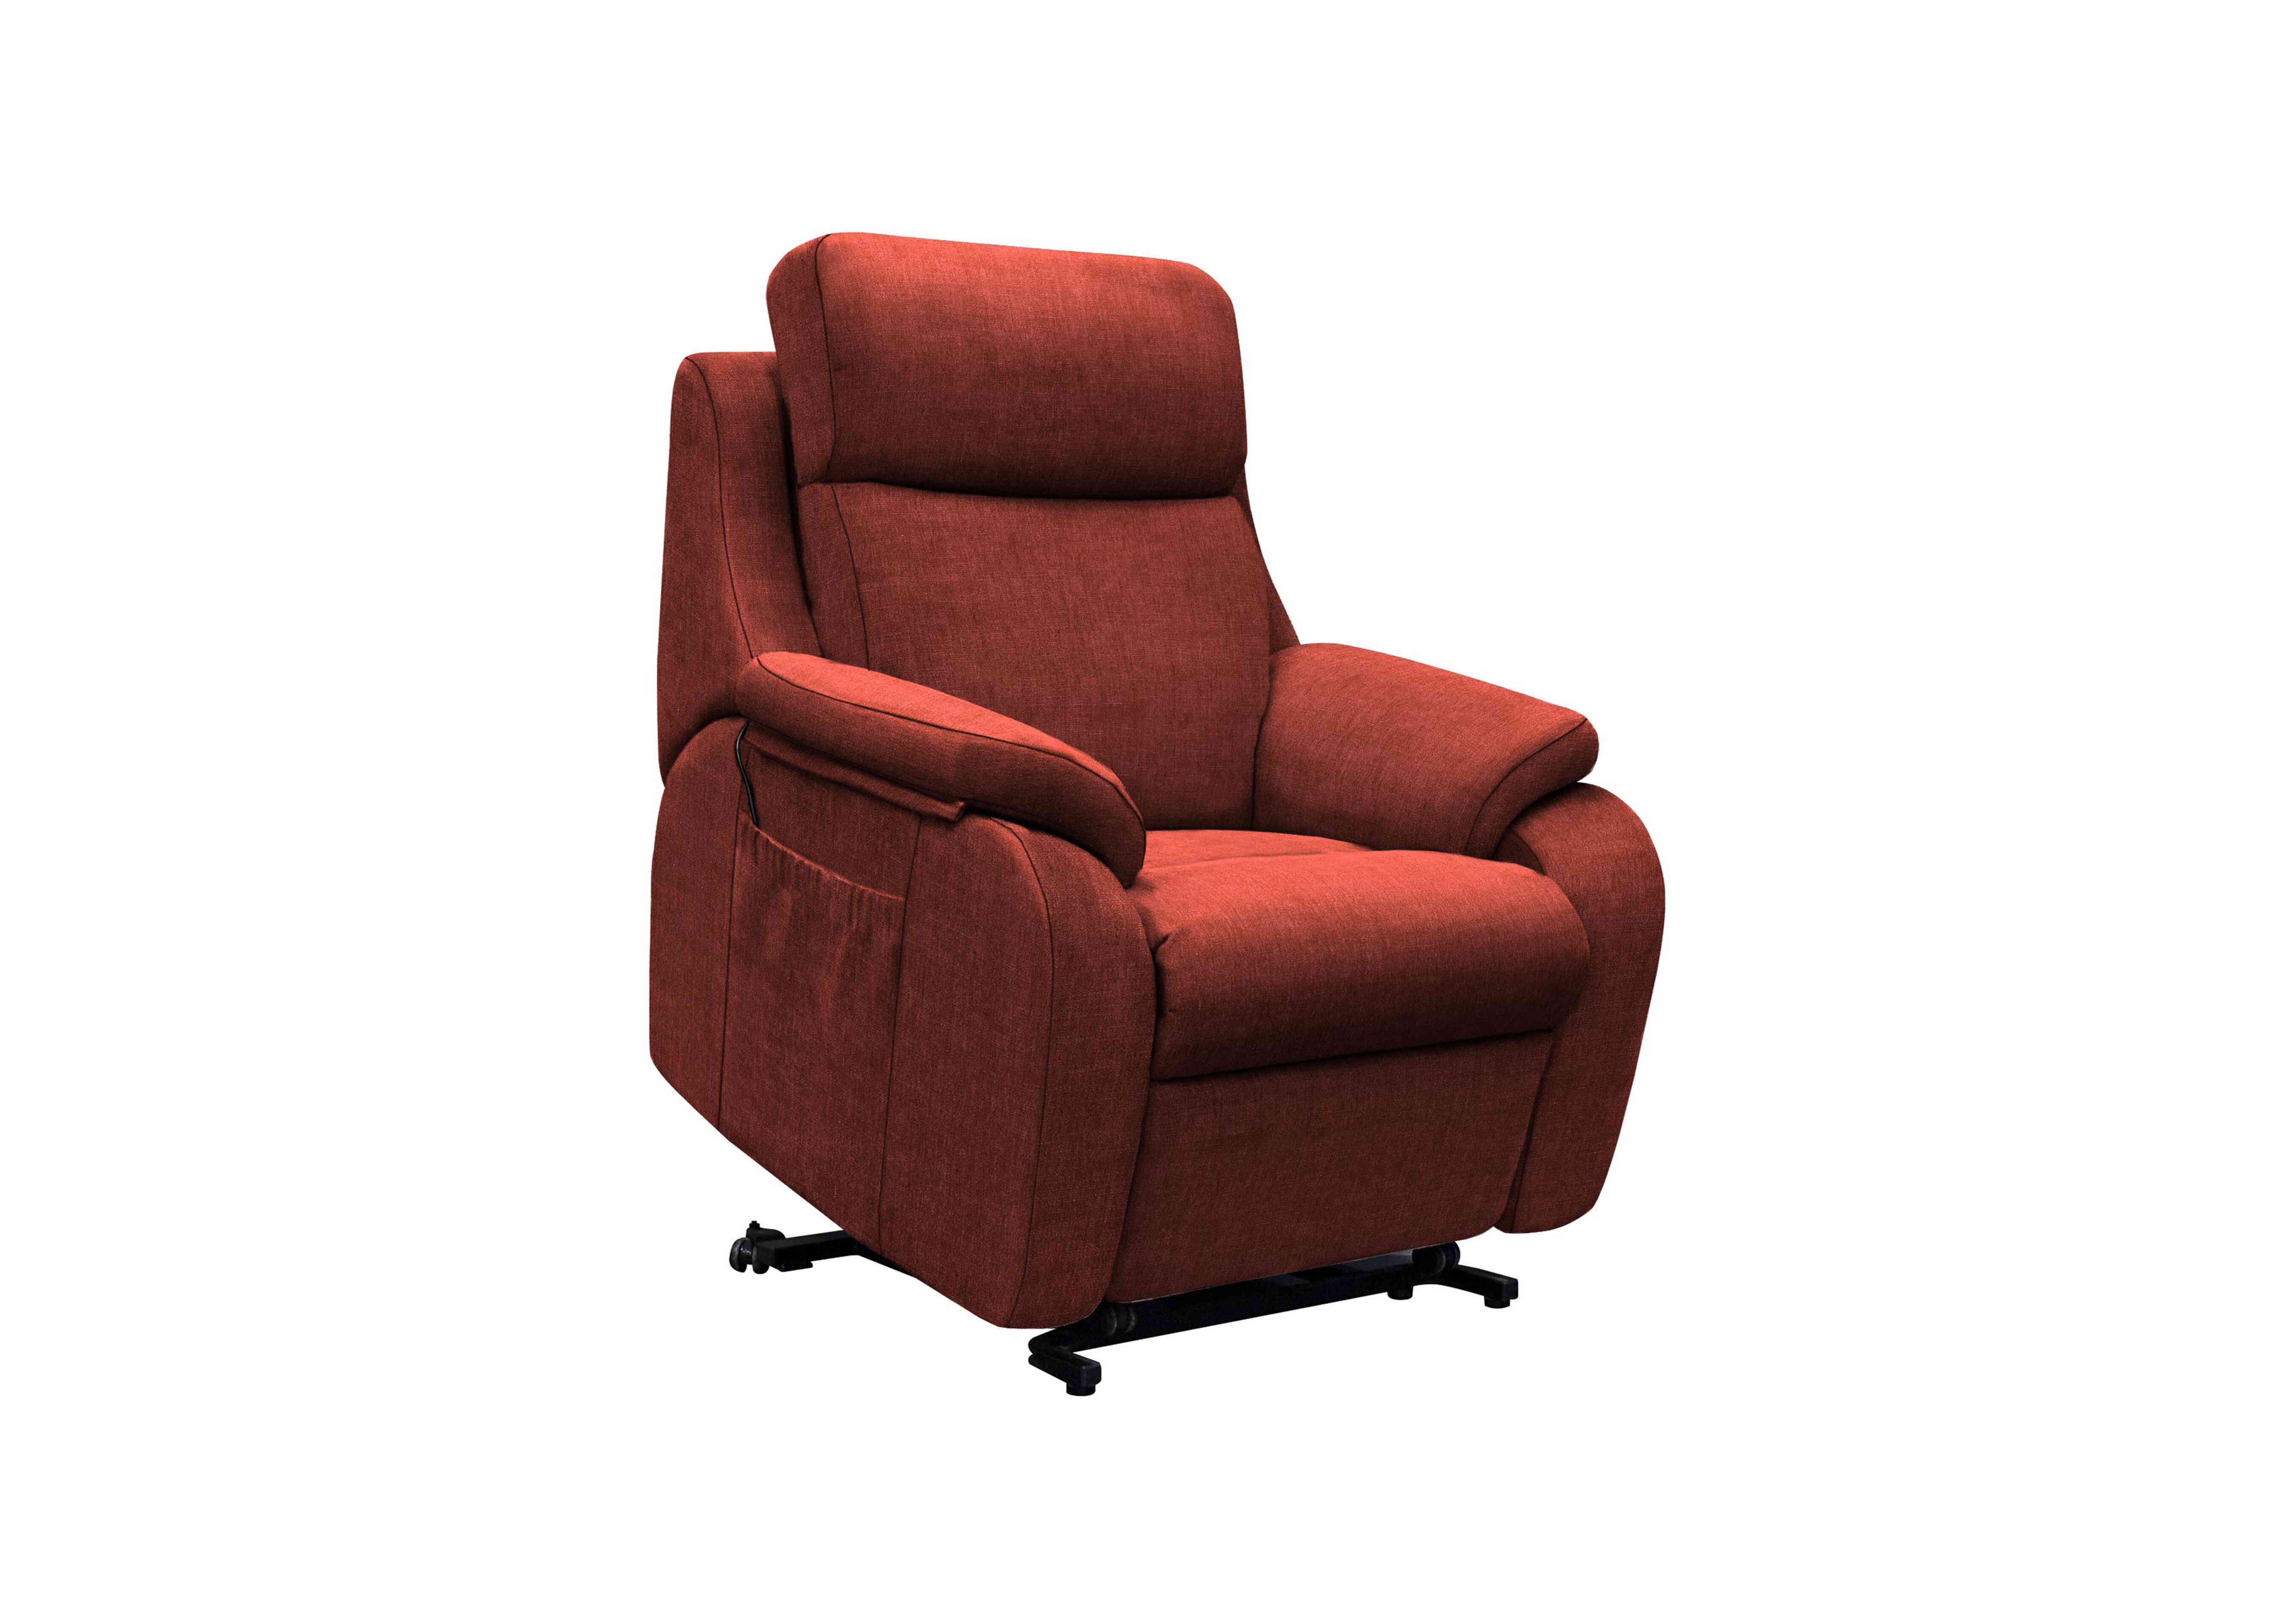 Kingsbury Large Fabric Lift and Rise Chair in B148 Manhattan Burgundy on Furniture Village